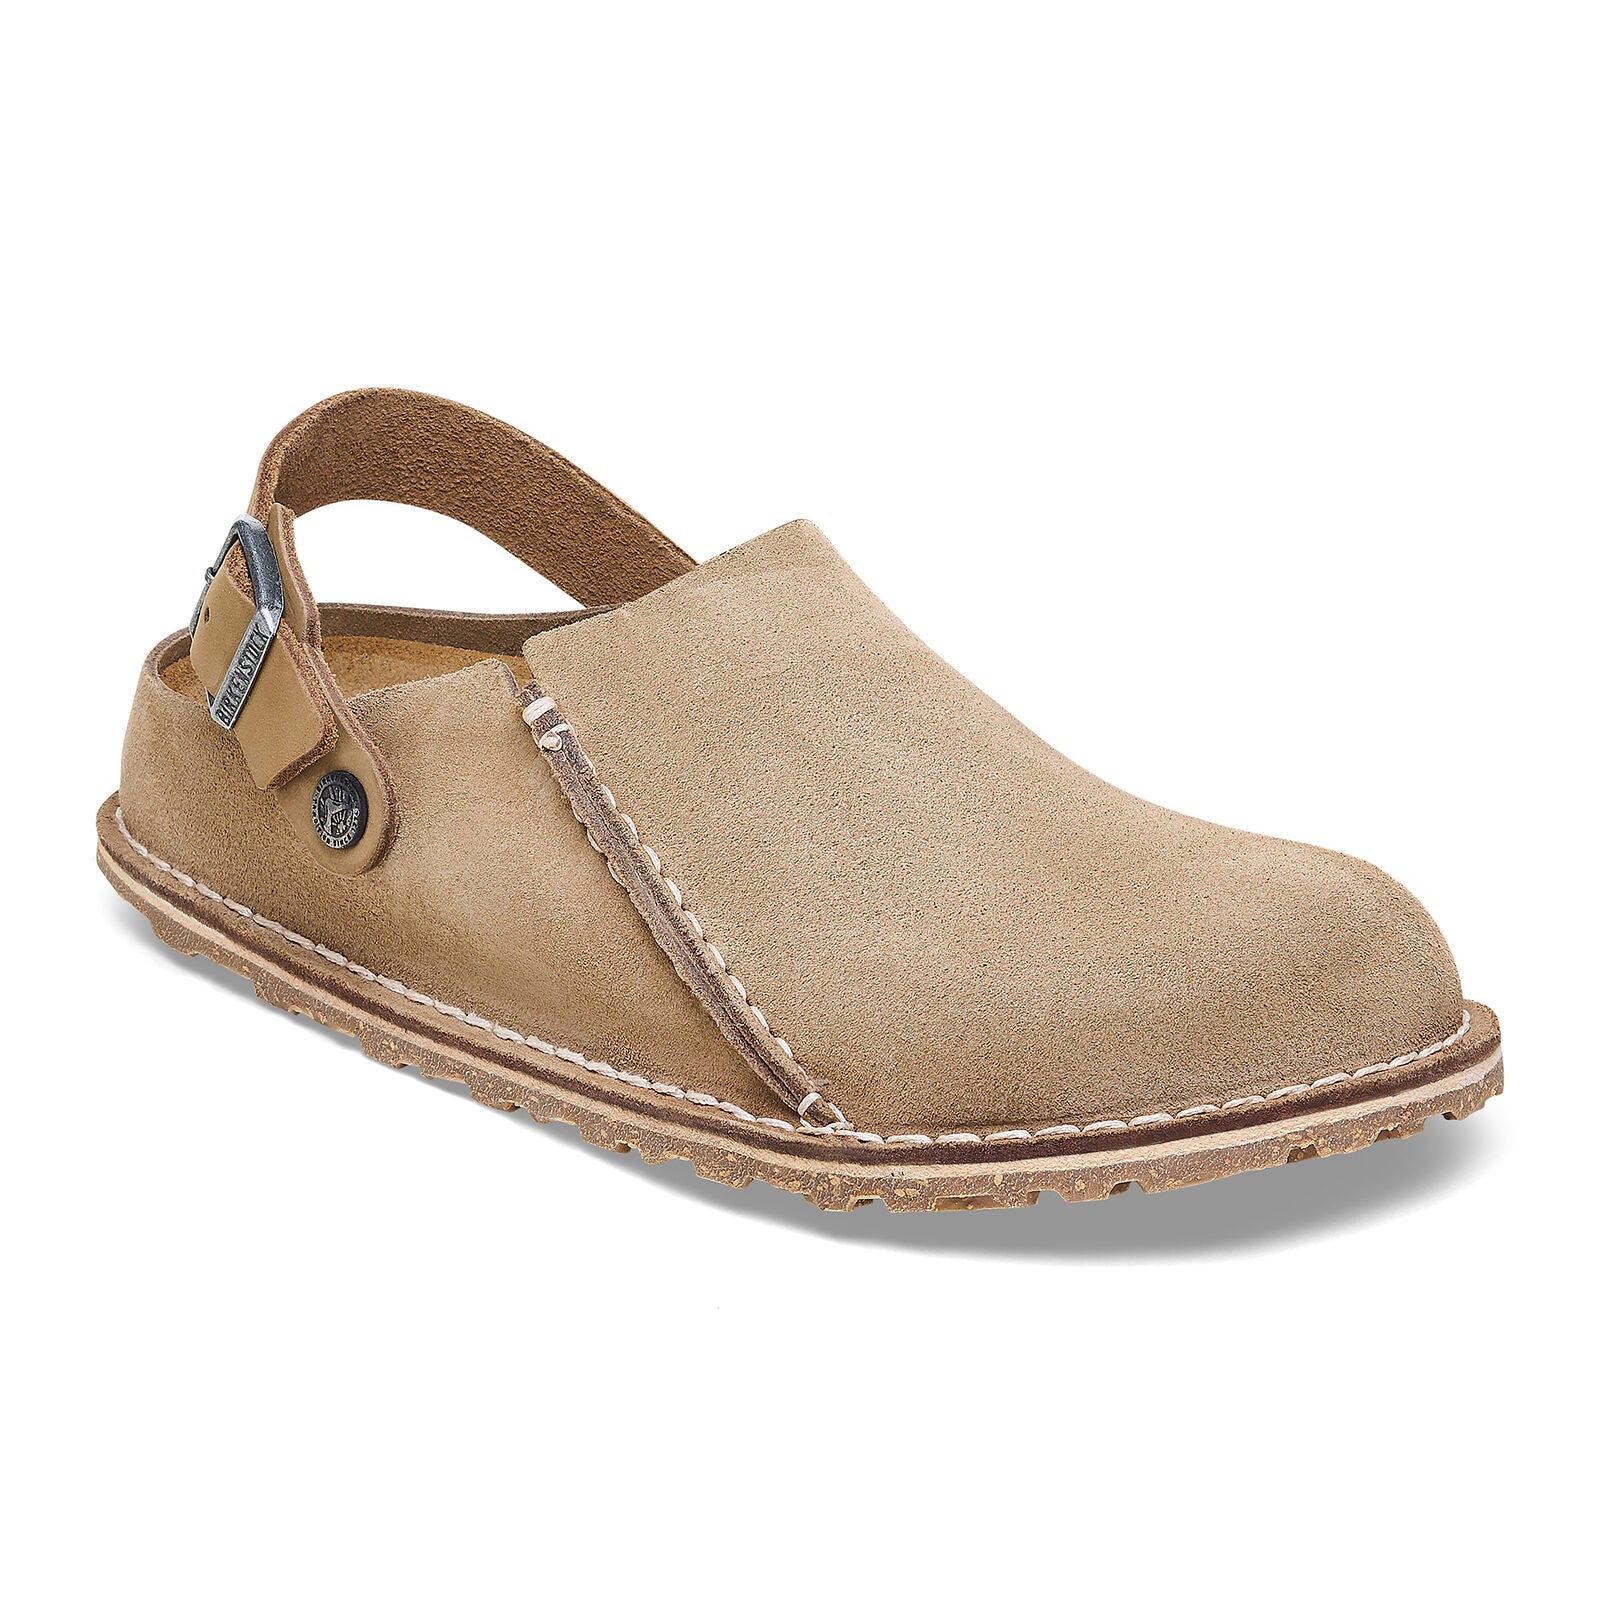 Birkenstock Limited Edition Lutry gray taupe suede